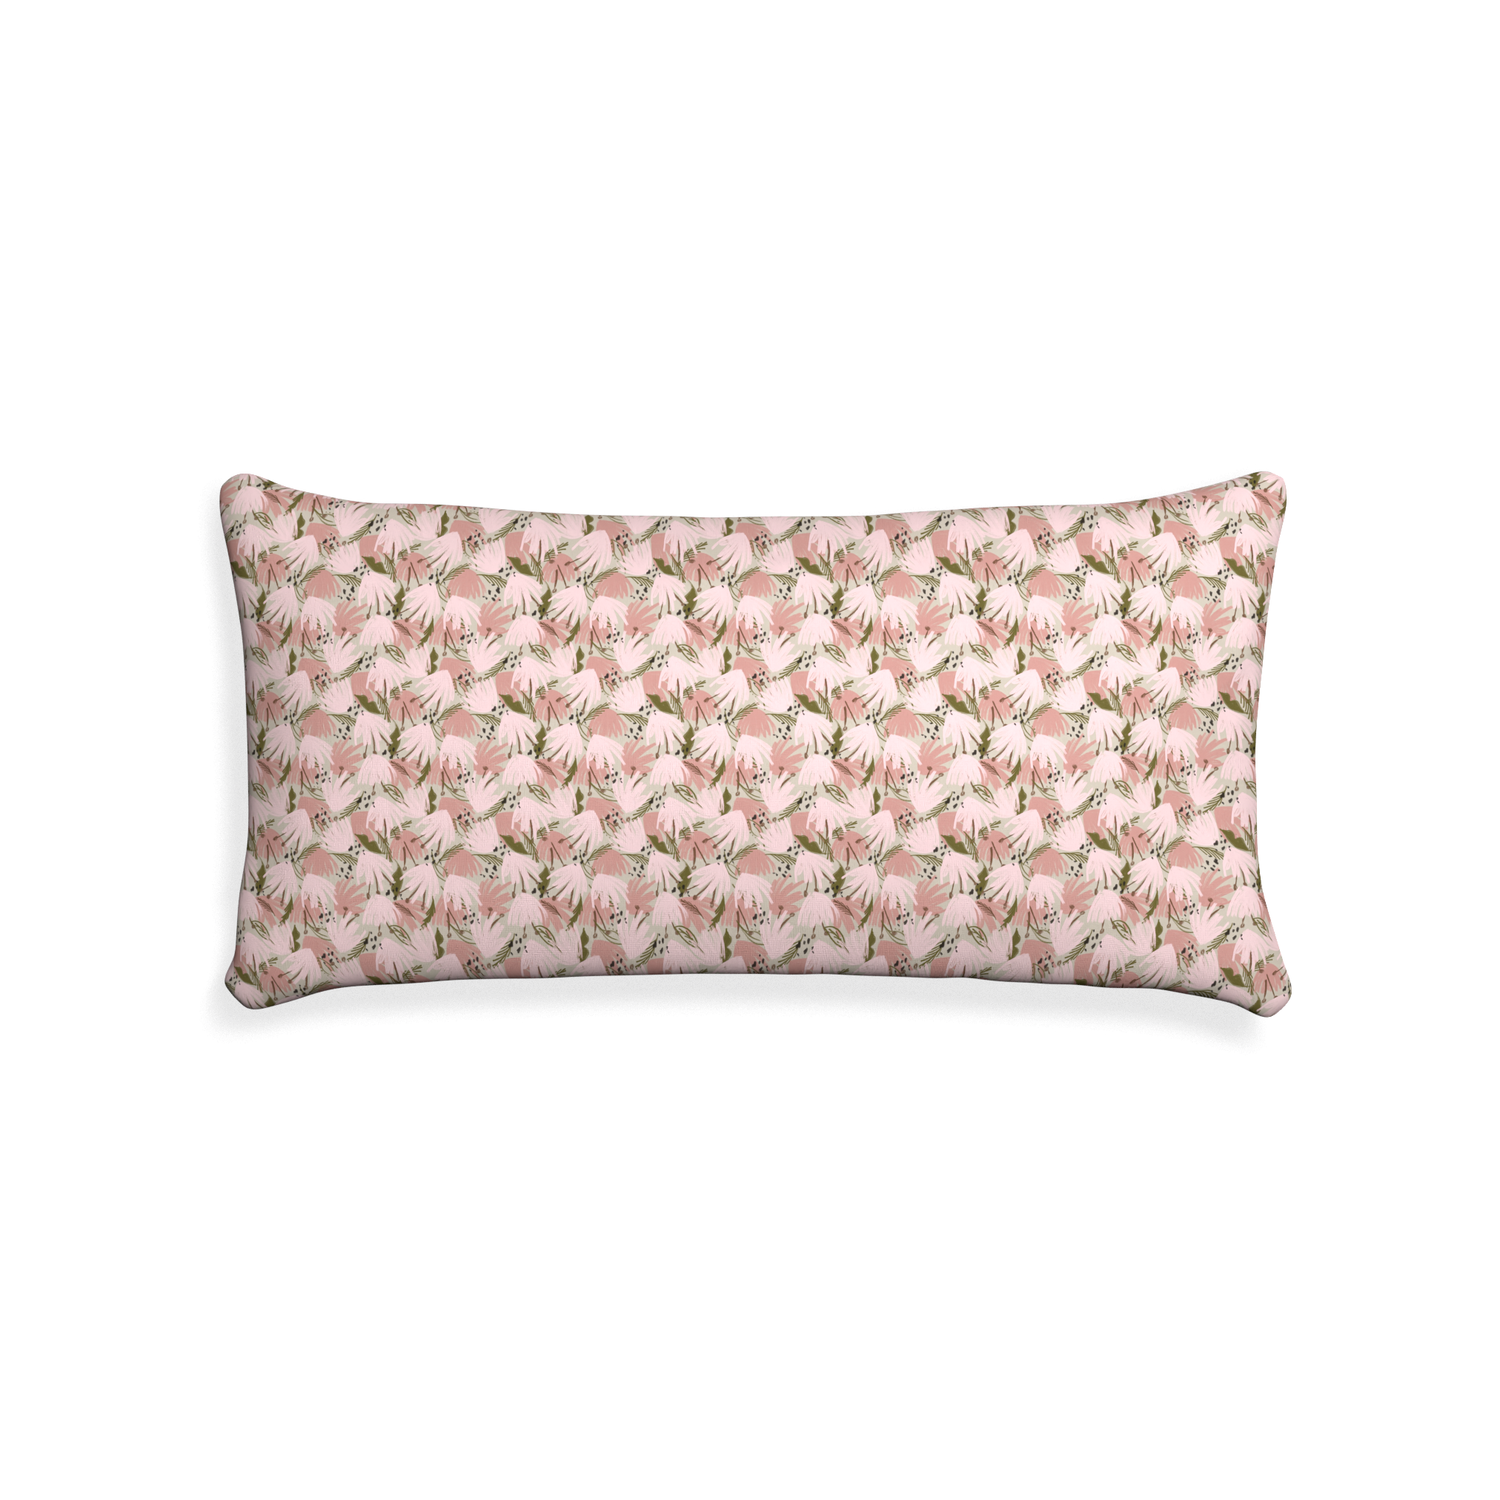 Midi-lumbar eden pink custom pink floralpillow with none on white background